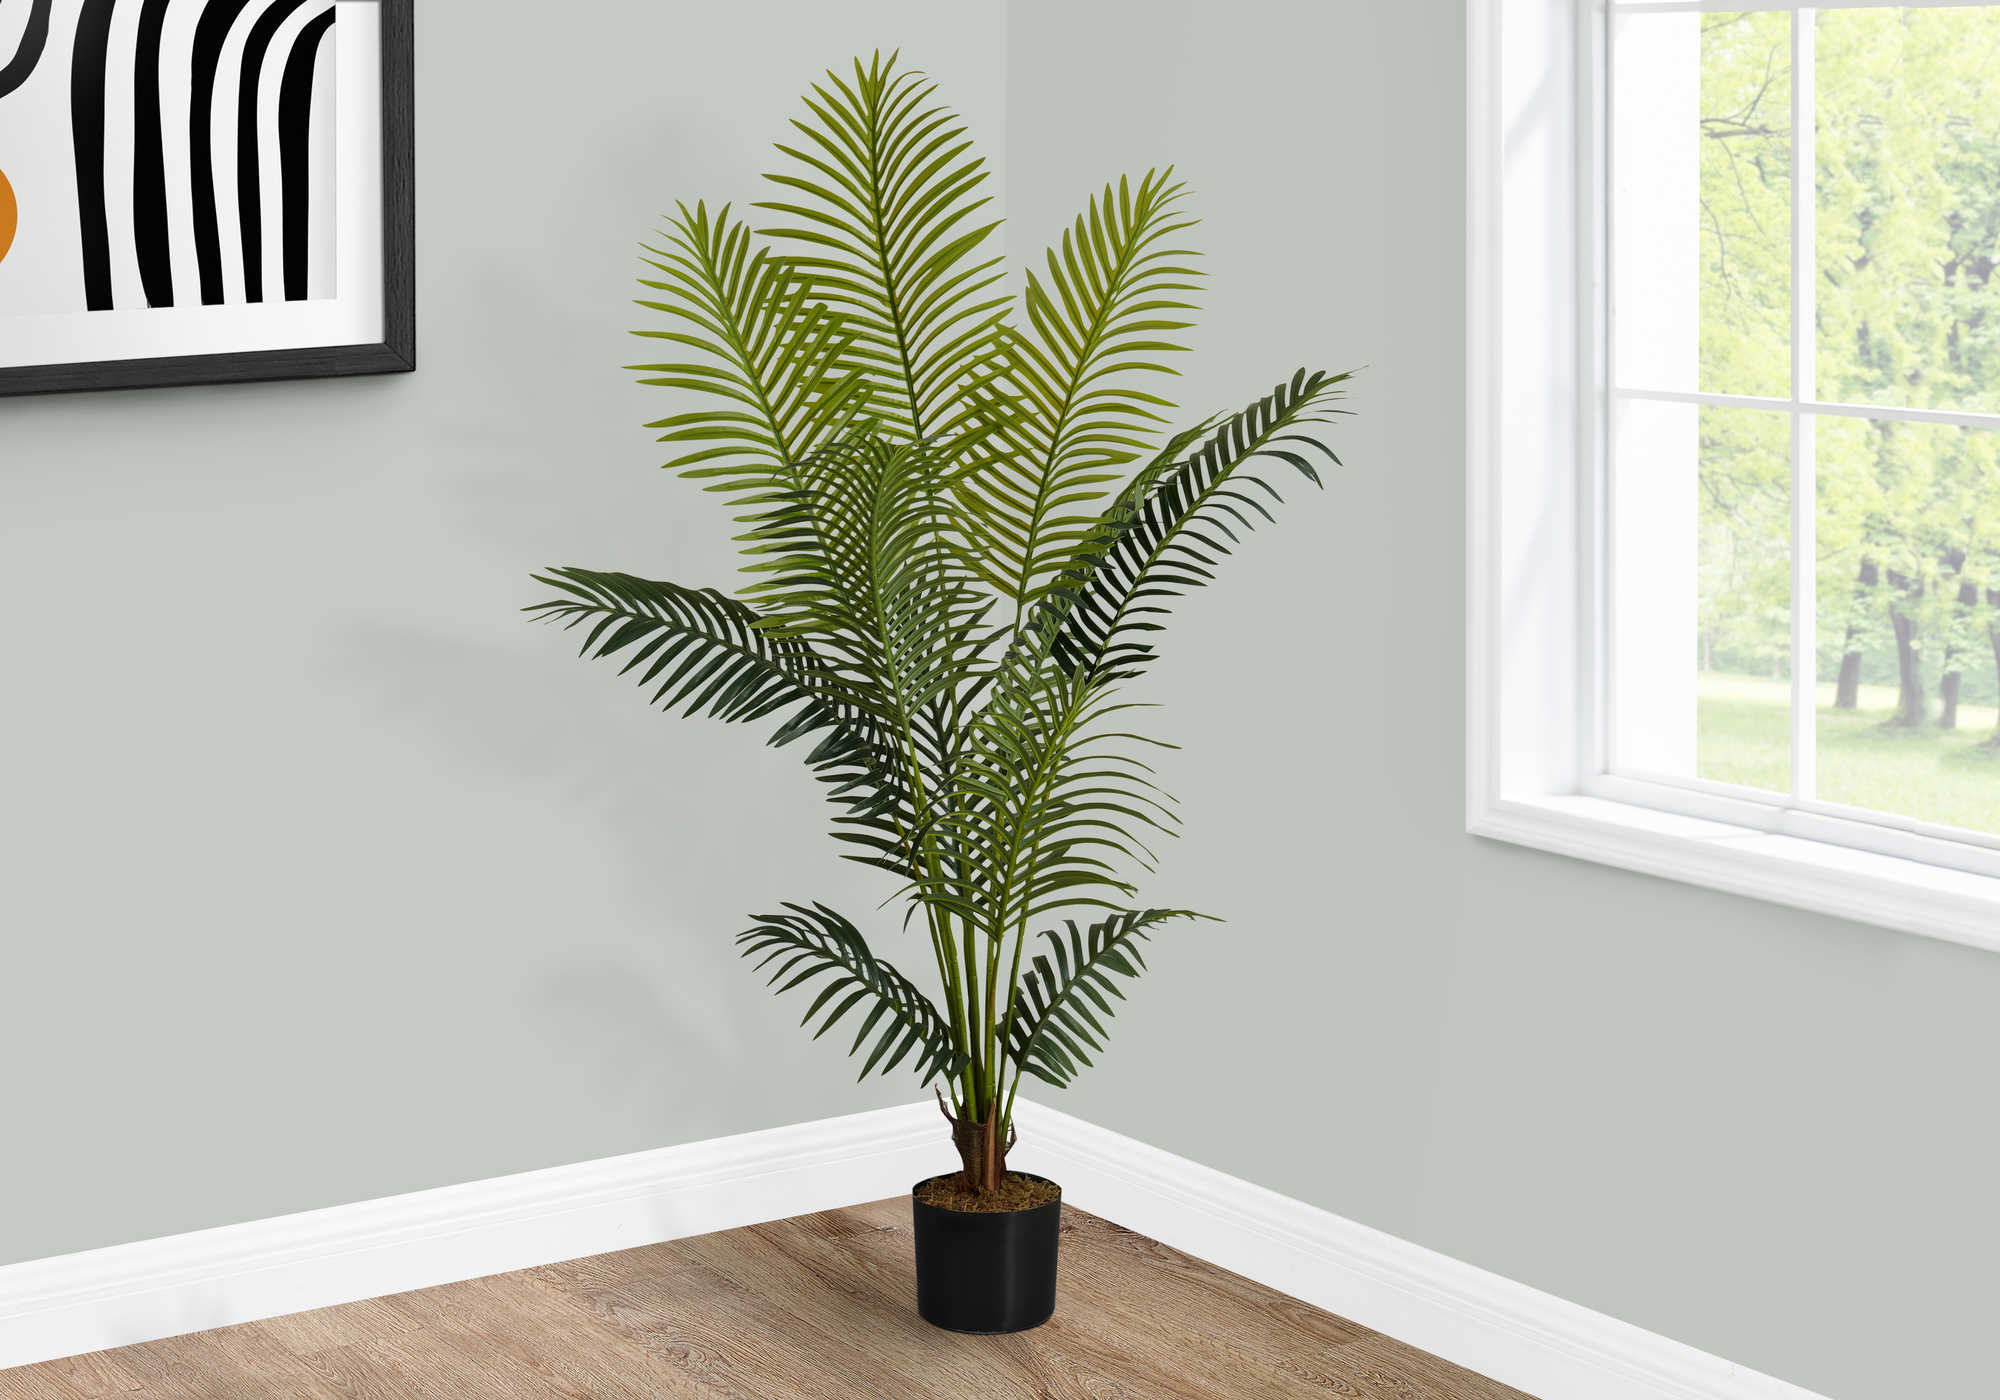 ARTIFICIAL PLANT - 57"H / INDOOR PALM TREE IN A 5" POT